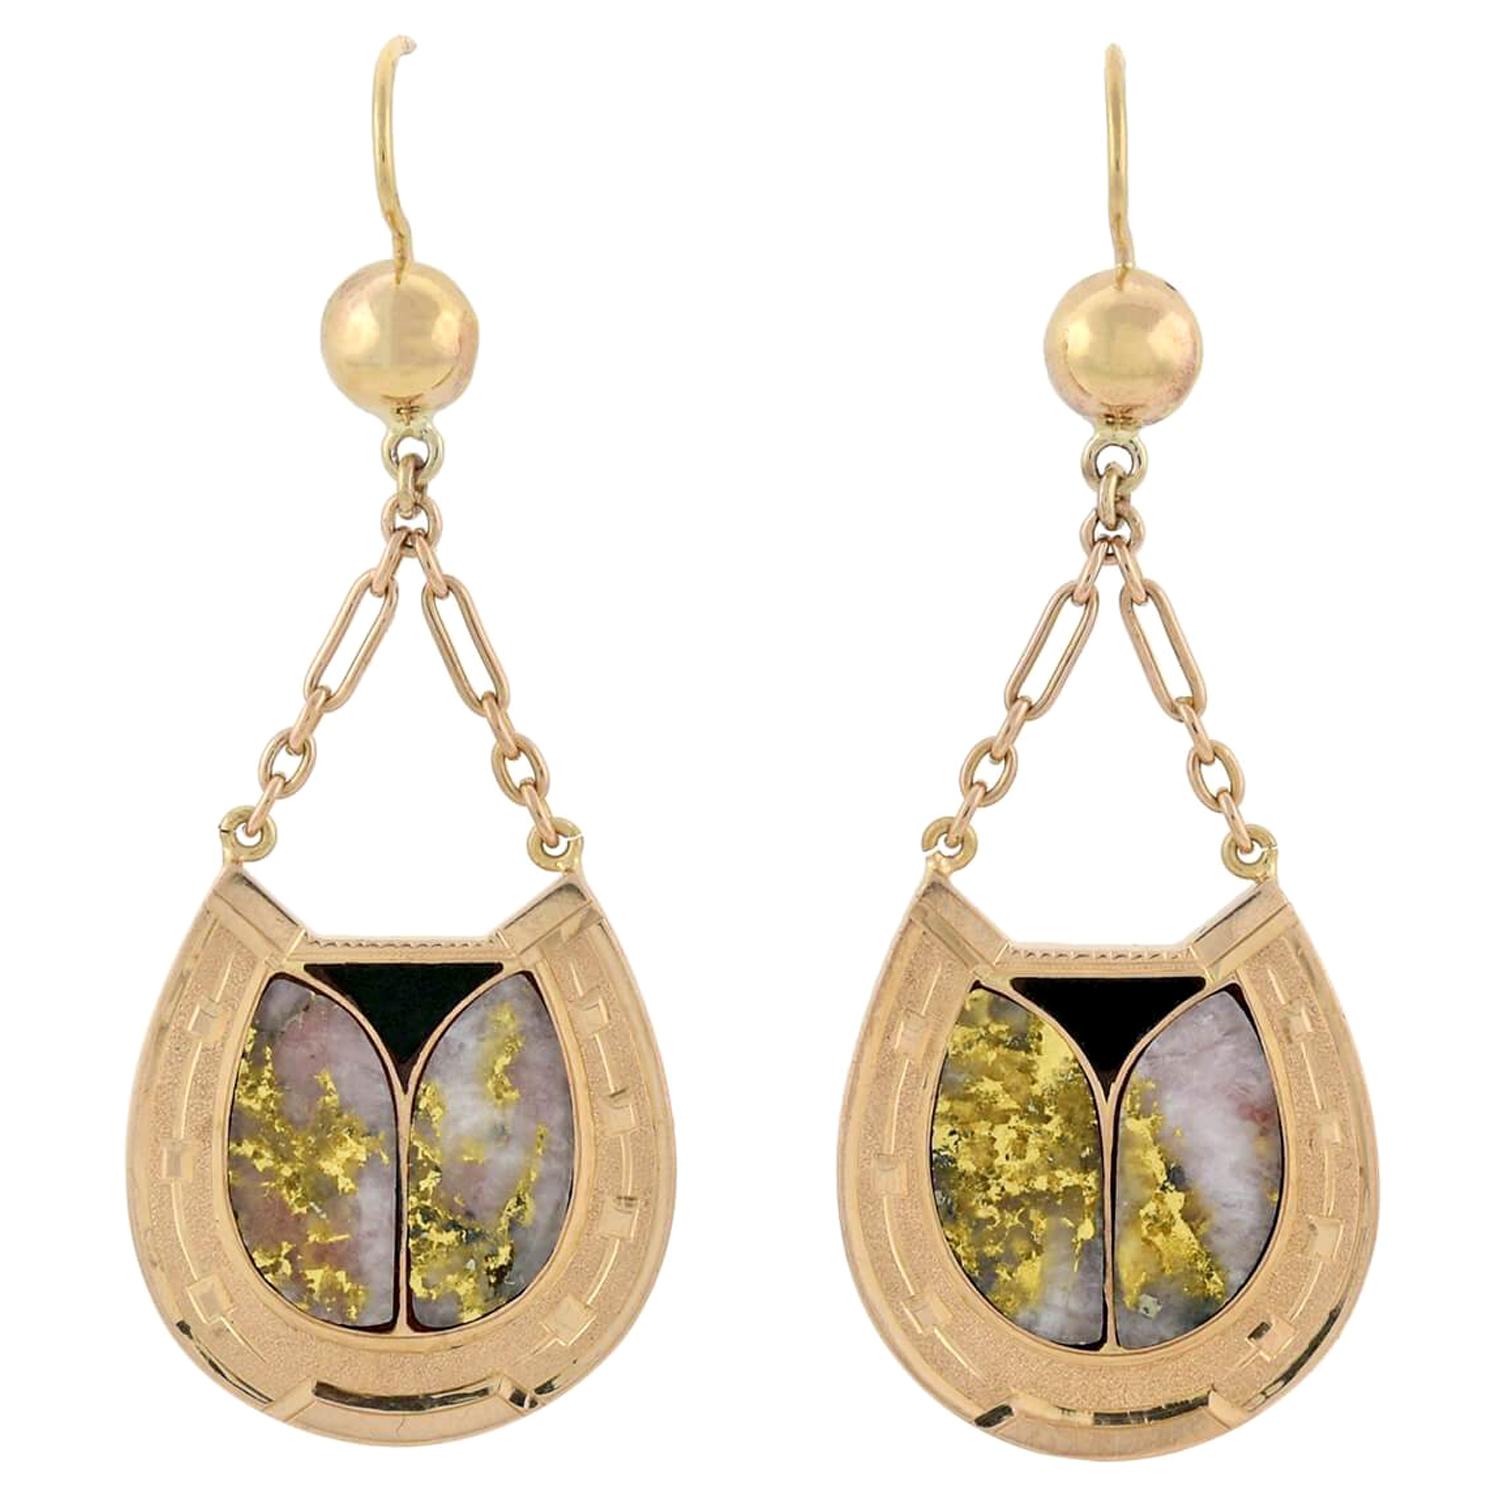 Victorian Inlaid Gold-in-Quartz and Agate Horseshoe Earrings